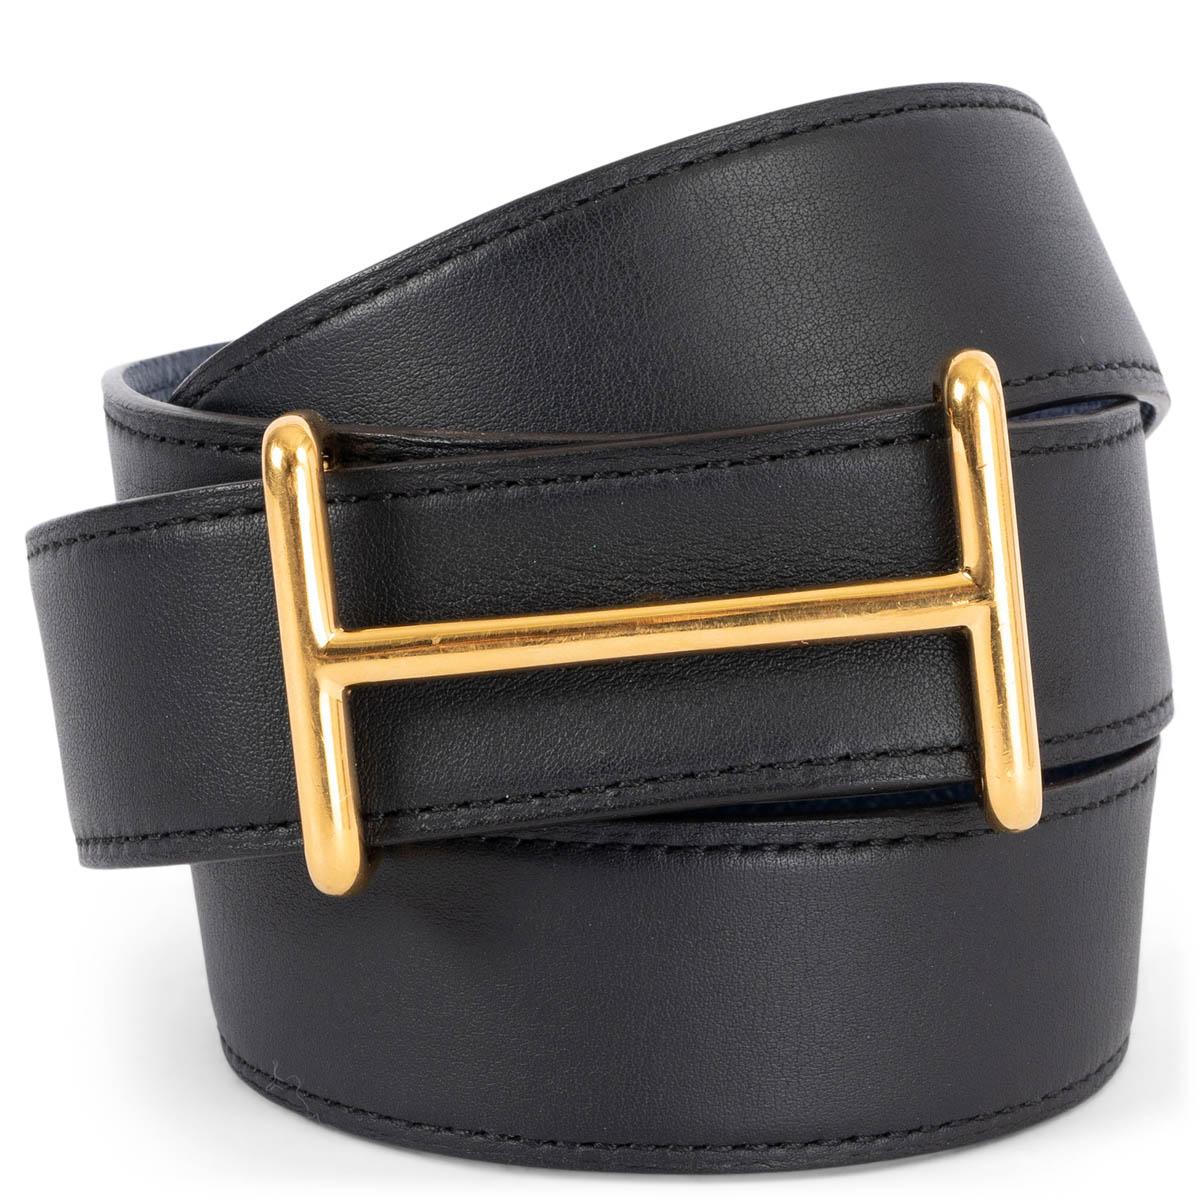 100% authentic Hermès Idem 32mm reversible belt in black Swift and Saphir Epsom leather with gold-plated buckle. Has been worn and is in excellent condition.


Measurements
Tag Size	90
Width	3.2cm (1.2in)
Fits	88cm (34.3in) to 93cm